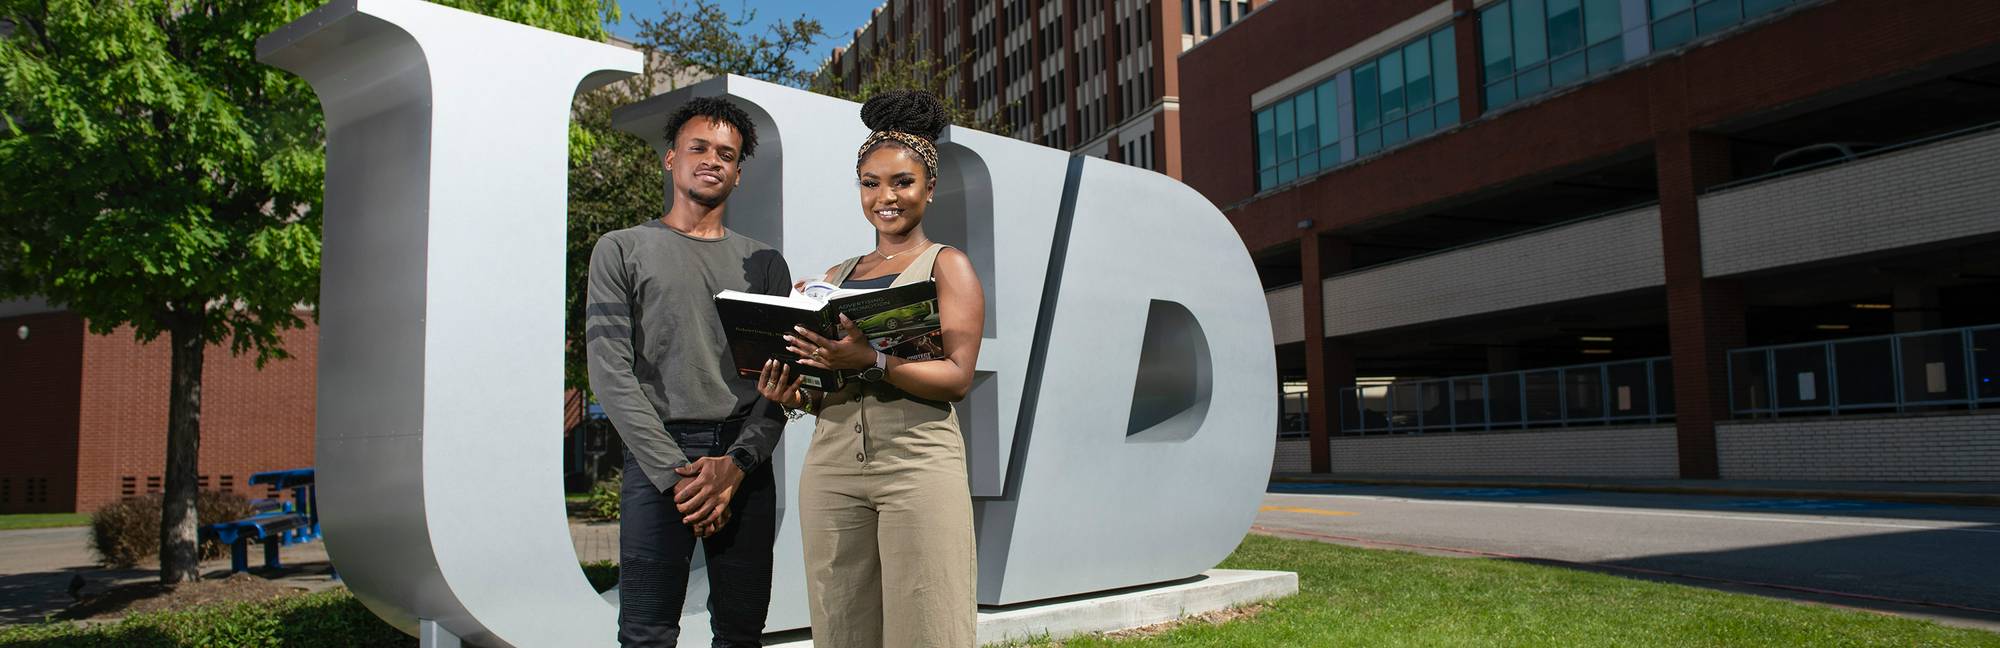 UHD student at the front of UHD logo statue